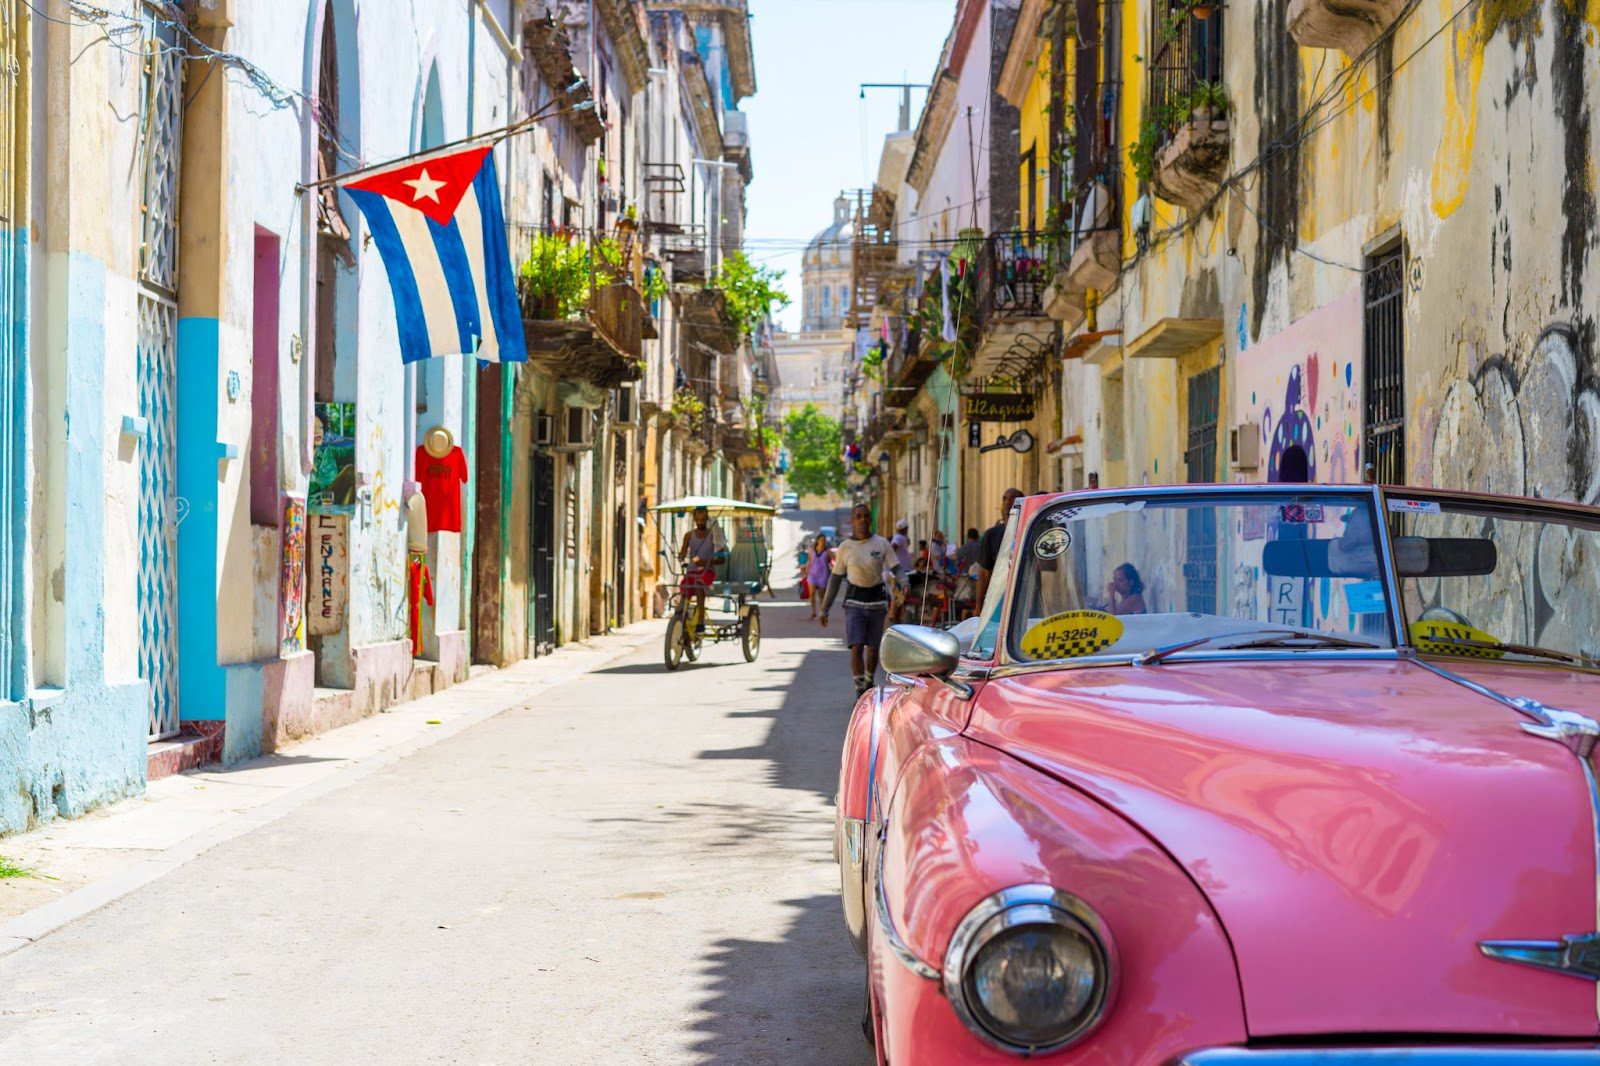 Why You Should Stay in a Casa Particular in Cuba